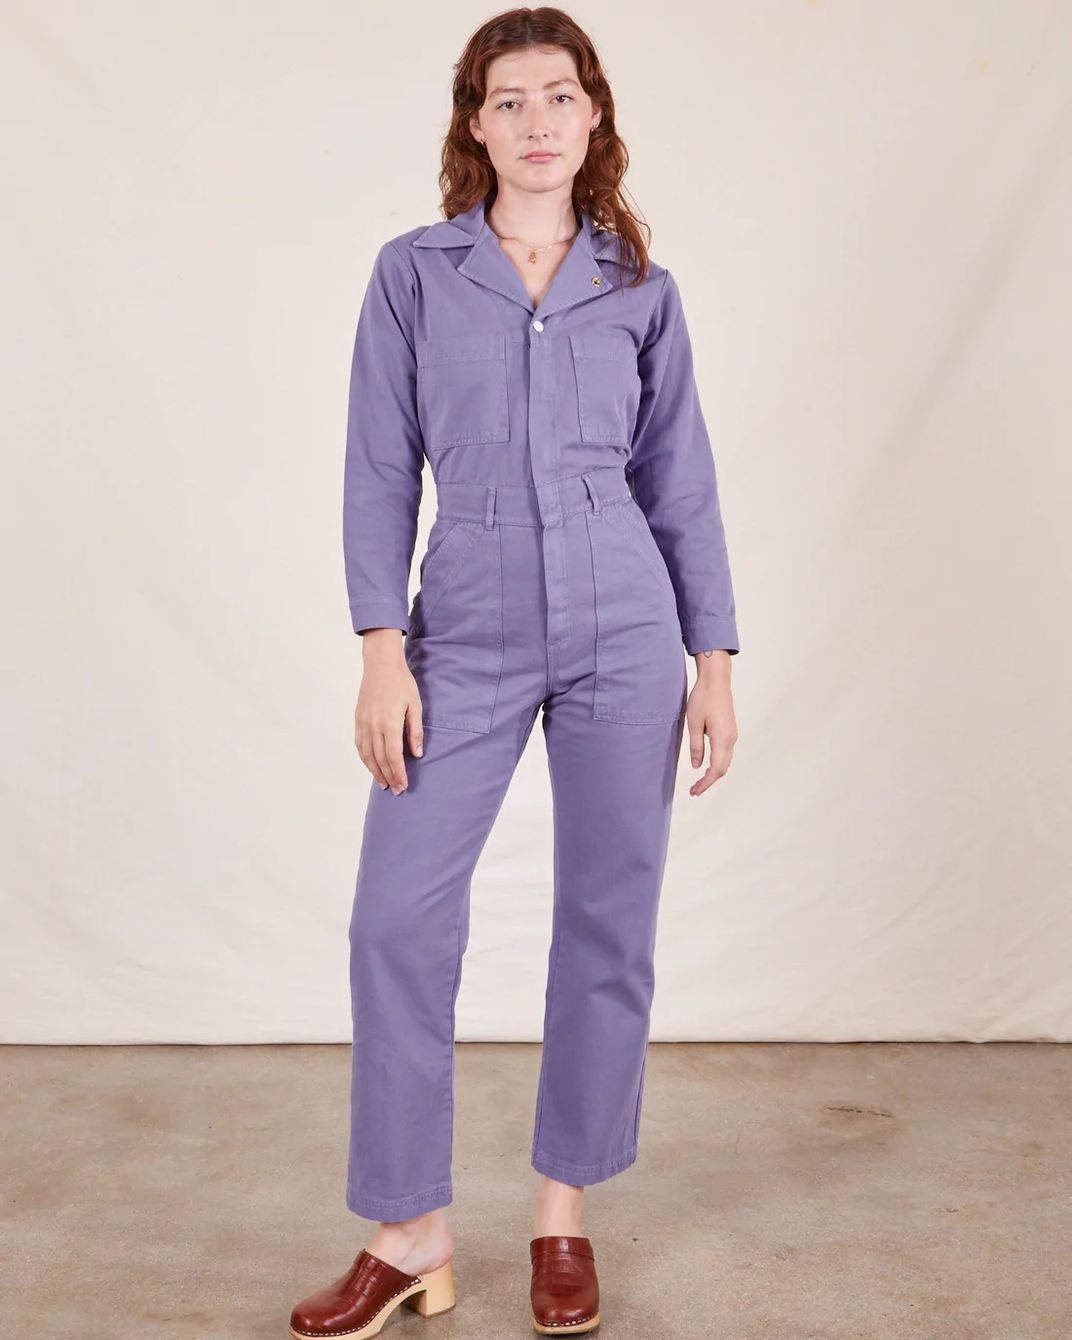 Petites 1X Size Jumpsuits & Rompers for Women | eBay